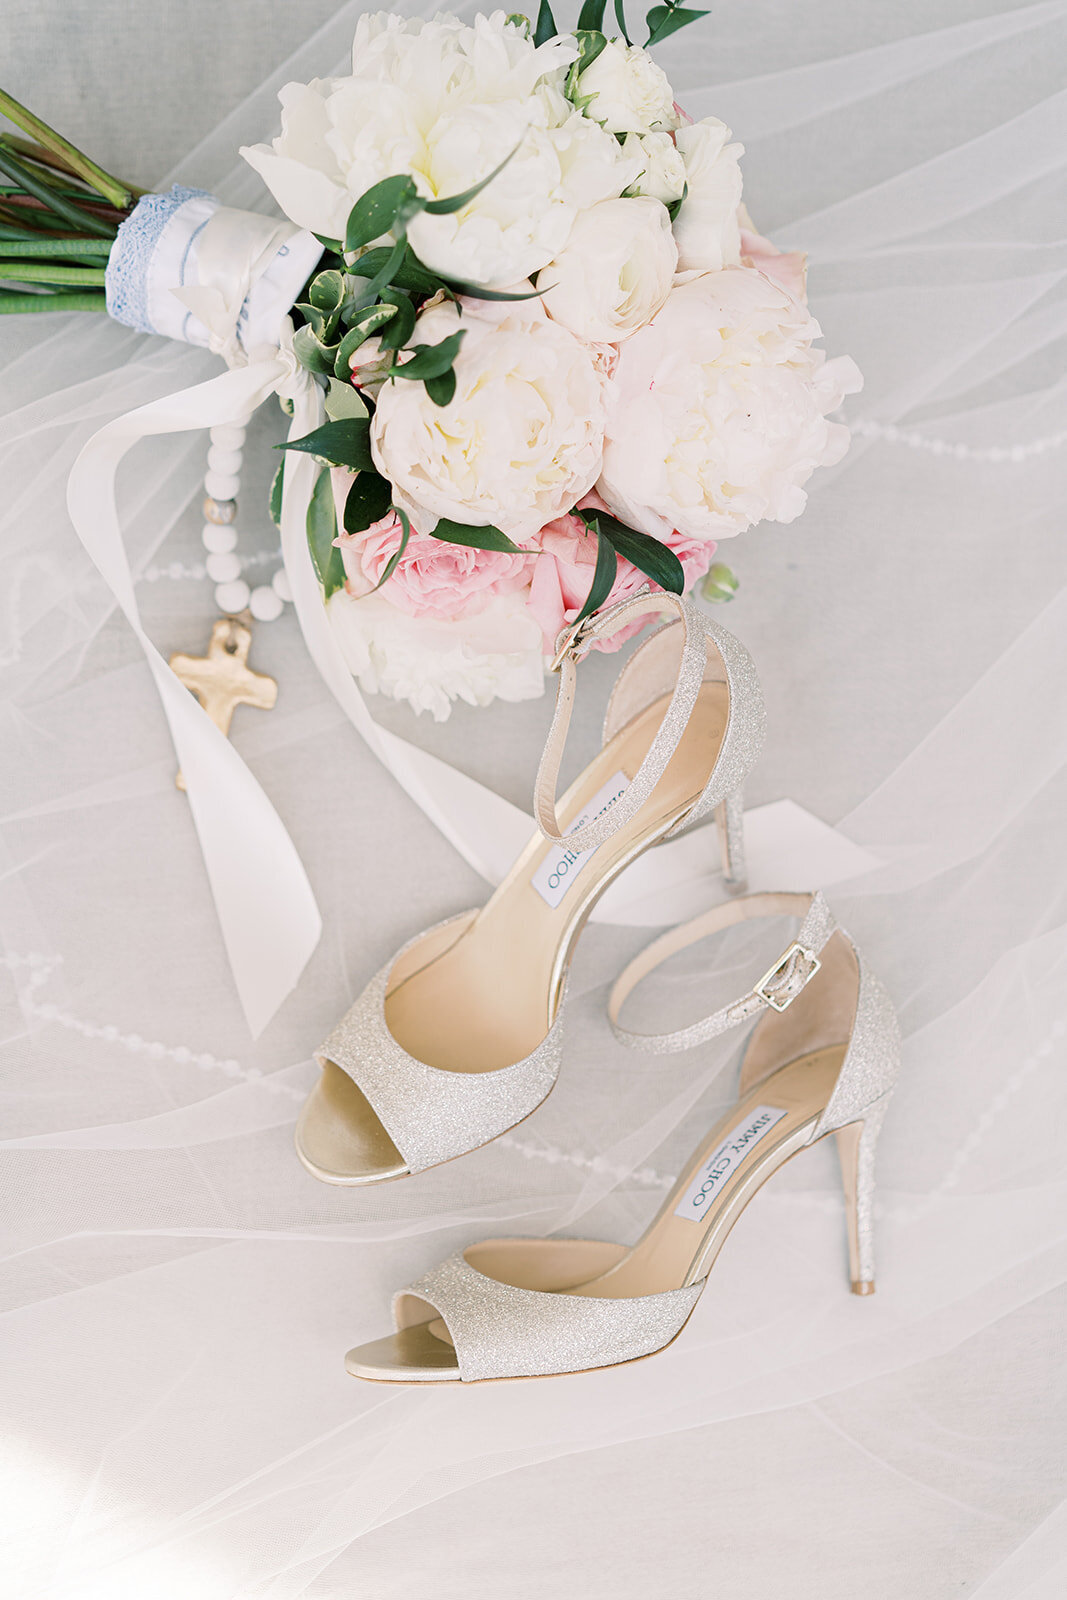 cream bridal shoes with a bouquet of white and pink flowers